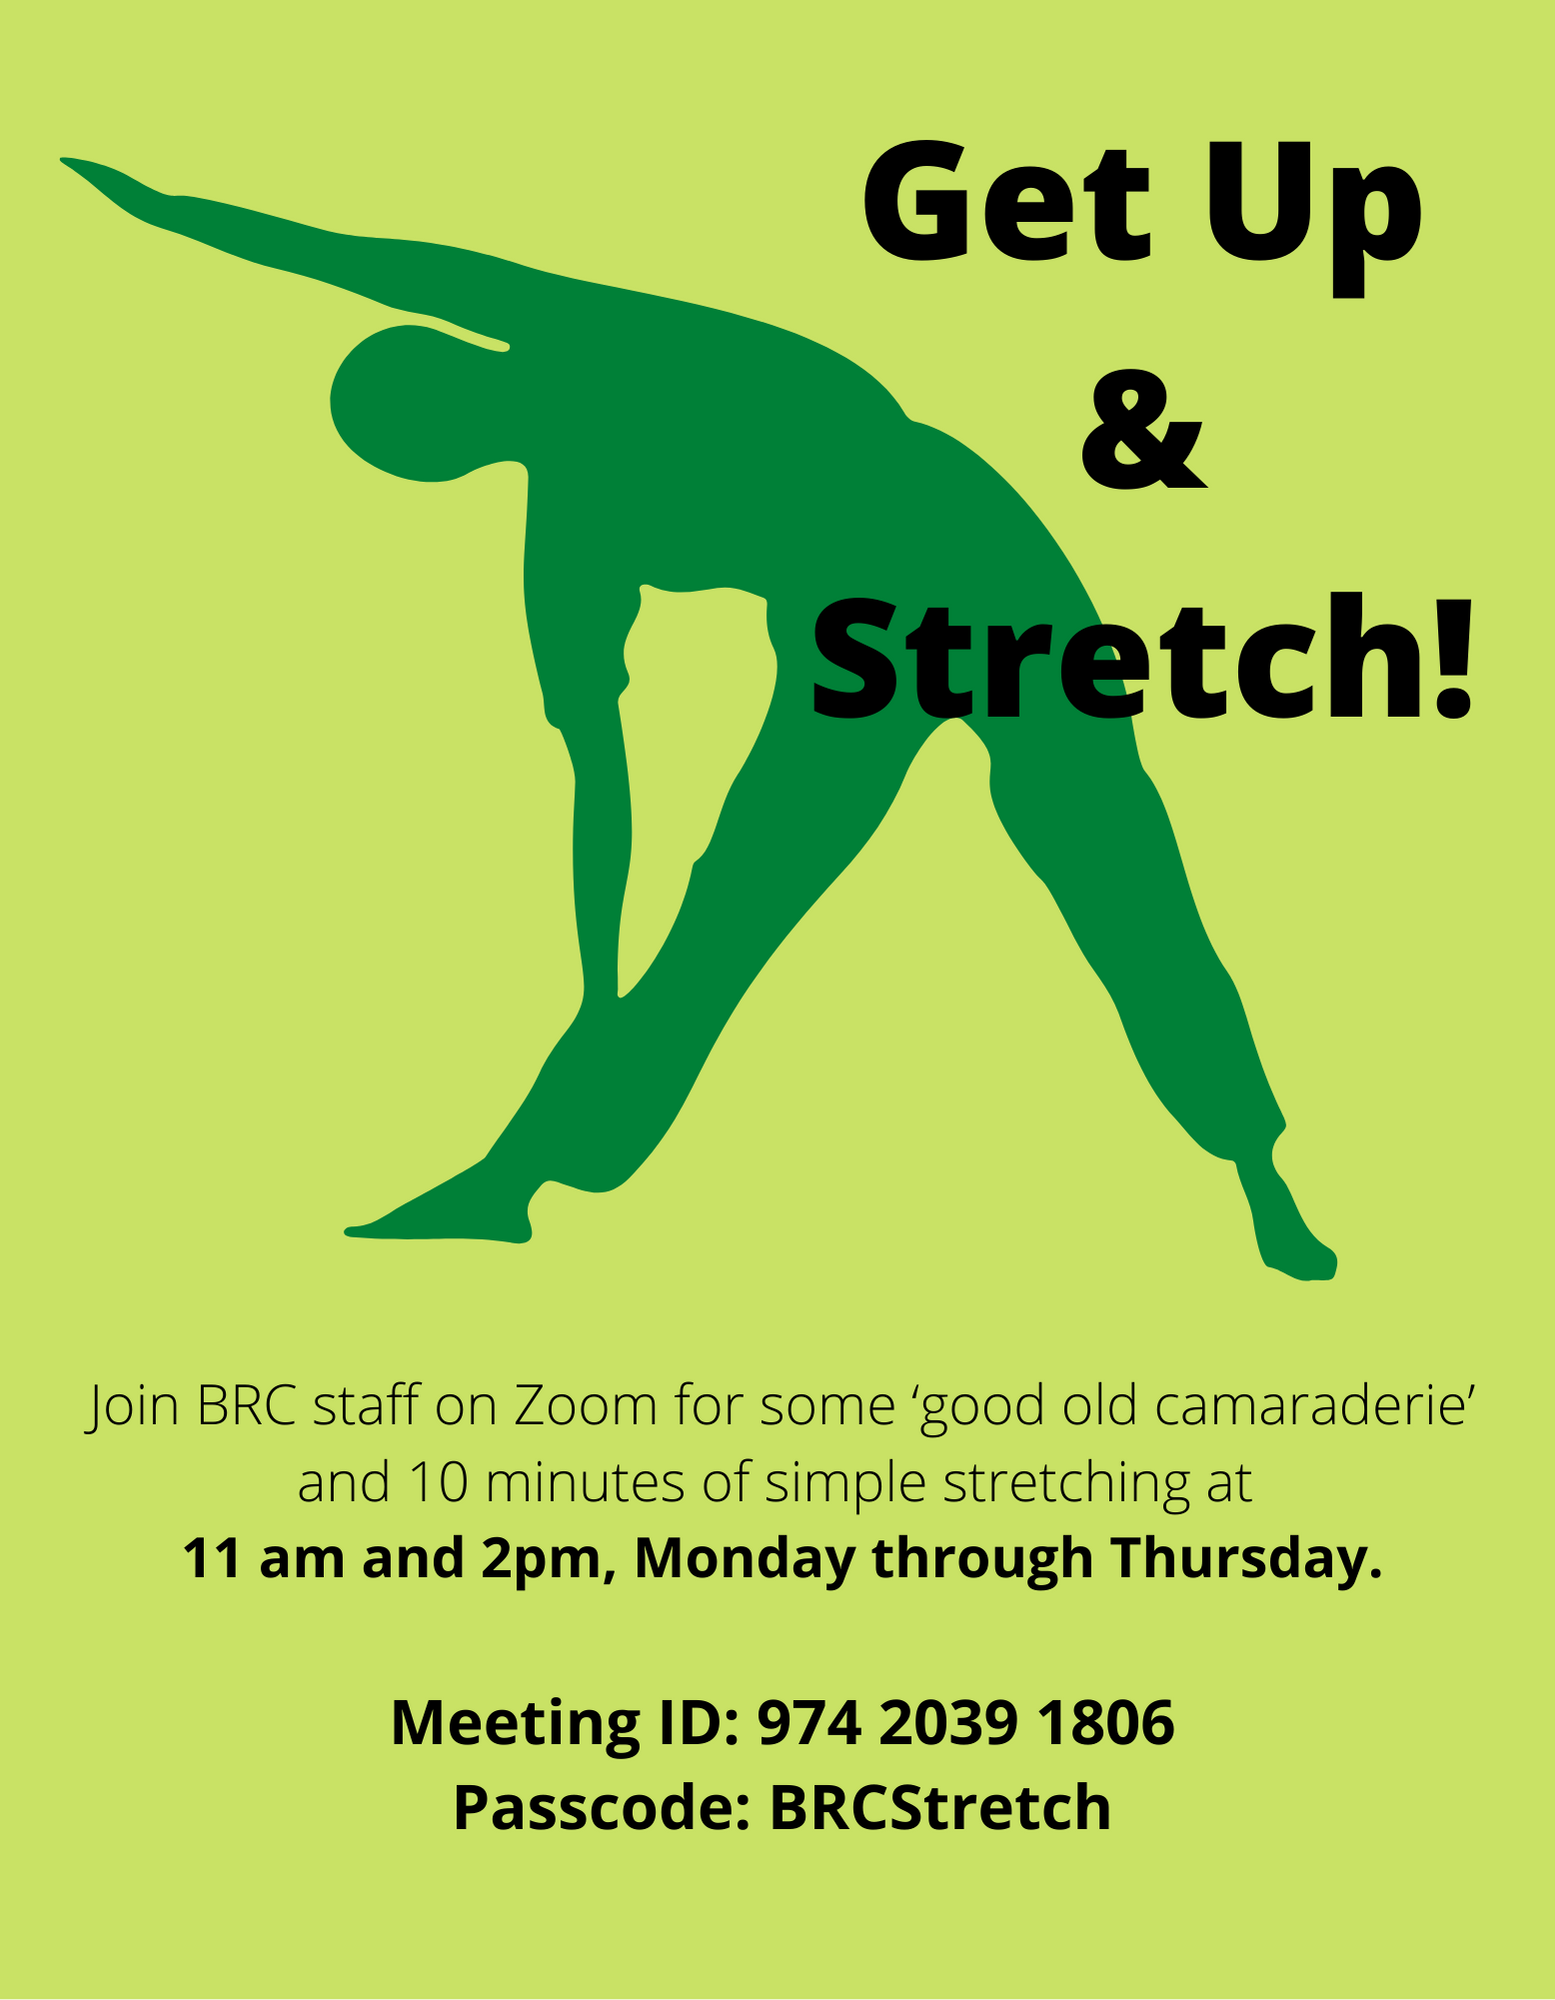 Get up and stretch graphic